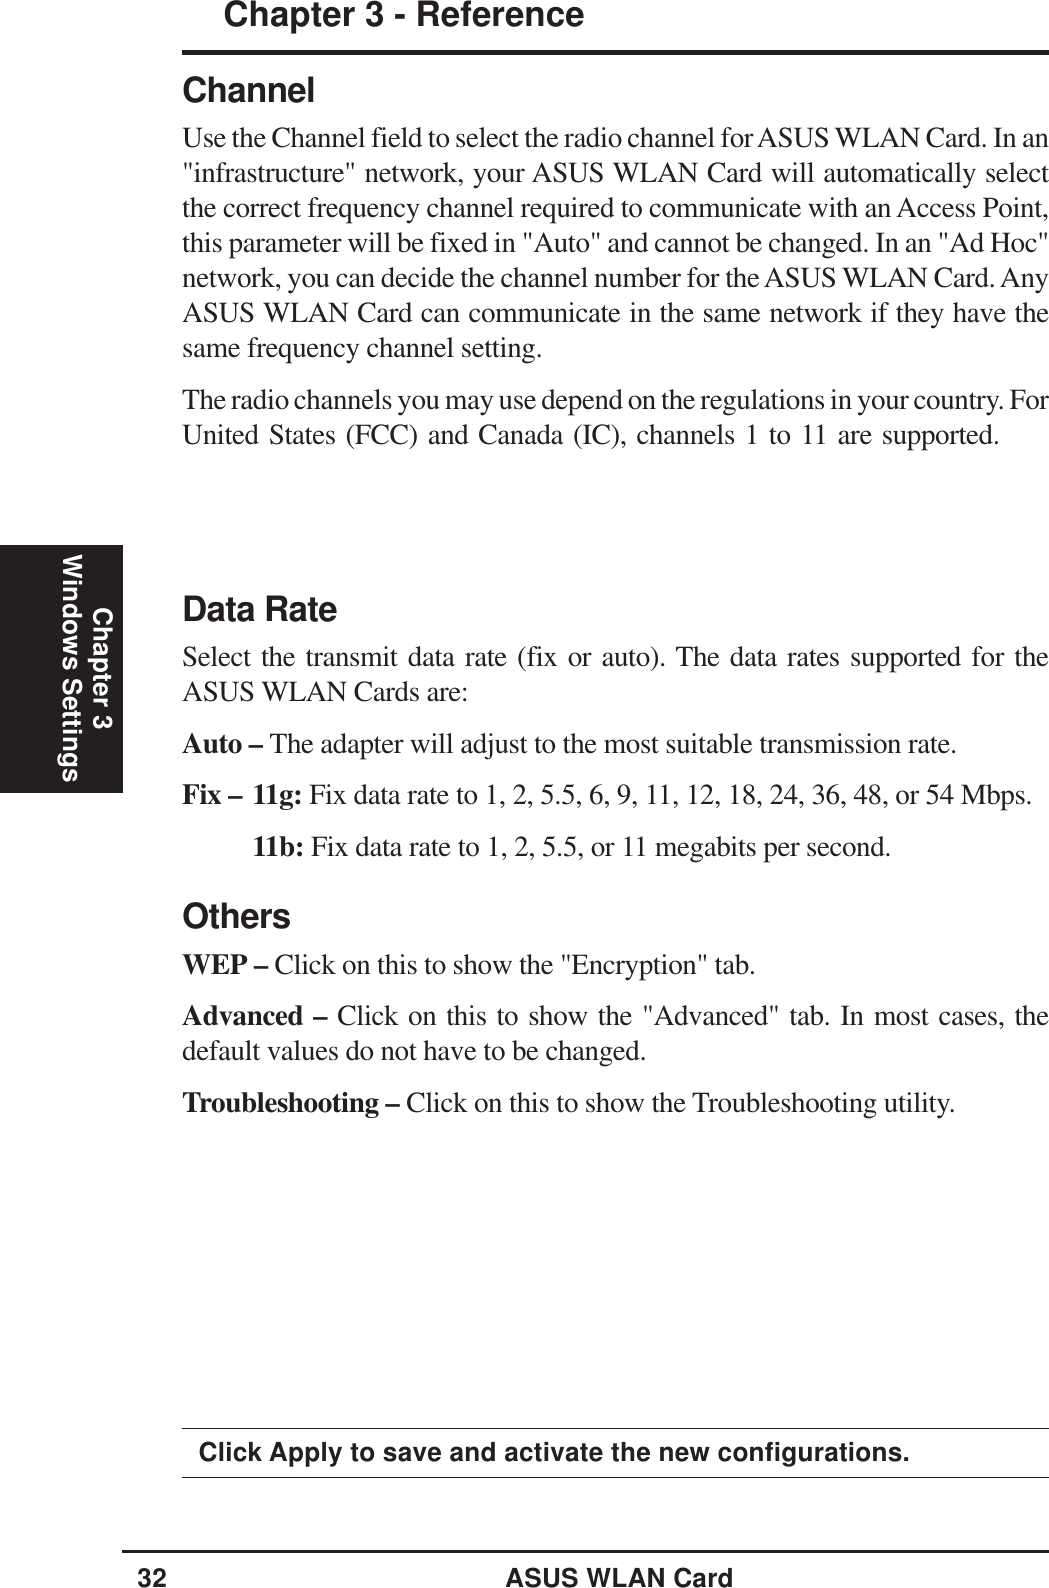 32 ASUS WLAN CardChapter 3 - ReferenceChapter 3Windows SettingsClick Apply to save and activate the new configurations.ChannelUse the Channel field to select the radio channel for ASUS WLAN Card. In an&quot;infrastructure&quot; network, your ASUS WLAN Card will automatically selectthe correct frequency channel required to communicate with an Access Point,this parameter will be fixed in &quot;Auto&quot; and cannot be changed. In an &quot;Ad Hoc&quot;network, you can decide the channel number for the ASUS WLAN Card. AnyASUS WLAN Card can communicate in the same network if they have thesame frequency channel setting.The radio channels you may use depend on the regulations in your country. ForUnited States (FCC) and Canada (IC), channels 1 to 11 are supported. Data RateSelect the transmit data rate (fix or auto). The data rates supported for theASUS WLAN Cards are:Auto – The adapter will adjust to the most suitable transmission rate.Fix – 11g: Fix data rate to 1, 2, 5.5, 6, 9, 11, 12, 18, 24, 36, 48, or 54 Mbps.11b: Fix data rate to 1, 2, 5.5, or 11 megabits per second.OthersWEP – Click on this to show the &quot;Encryption&quot; tab.Advanced – Click on this to show the &quot;Advanced&quot; tab. In most cases, thedefault values do not have to be changed.Troubleshooting – Click on this to show the Troubleshooting utility.